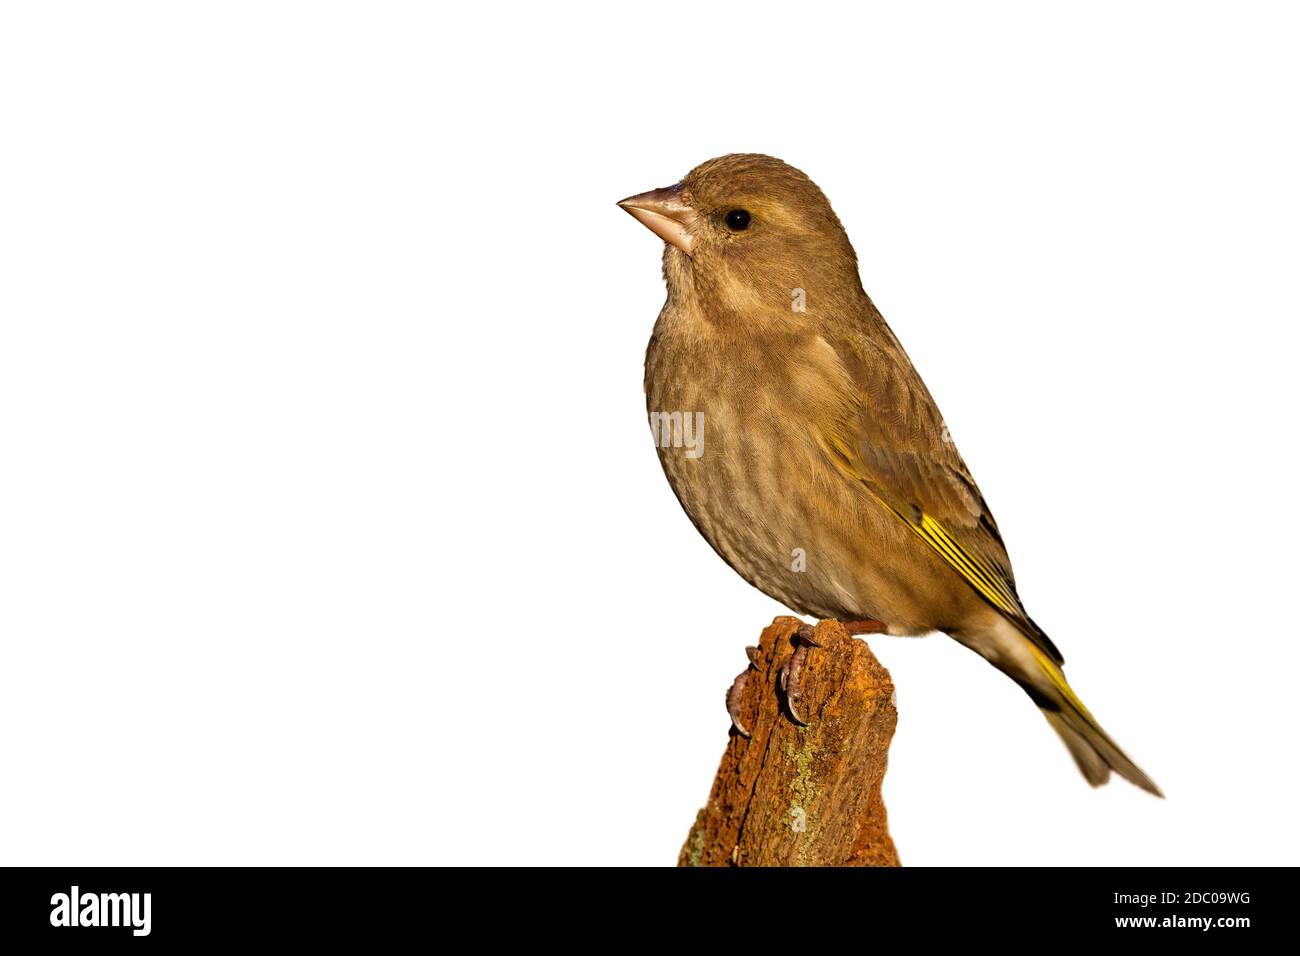 Female european greenfinch, chloris chloris, sitting on branch isolated on white background. Small yellow songbird resting on bough cut out on blank. Stock Photo